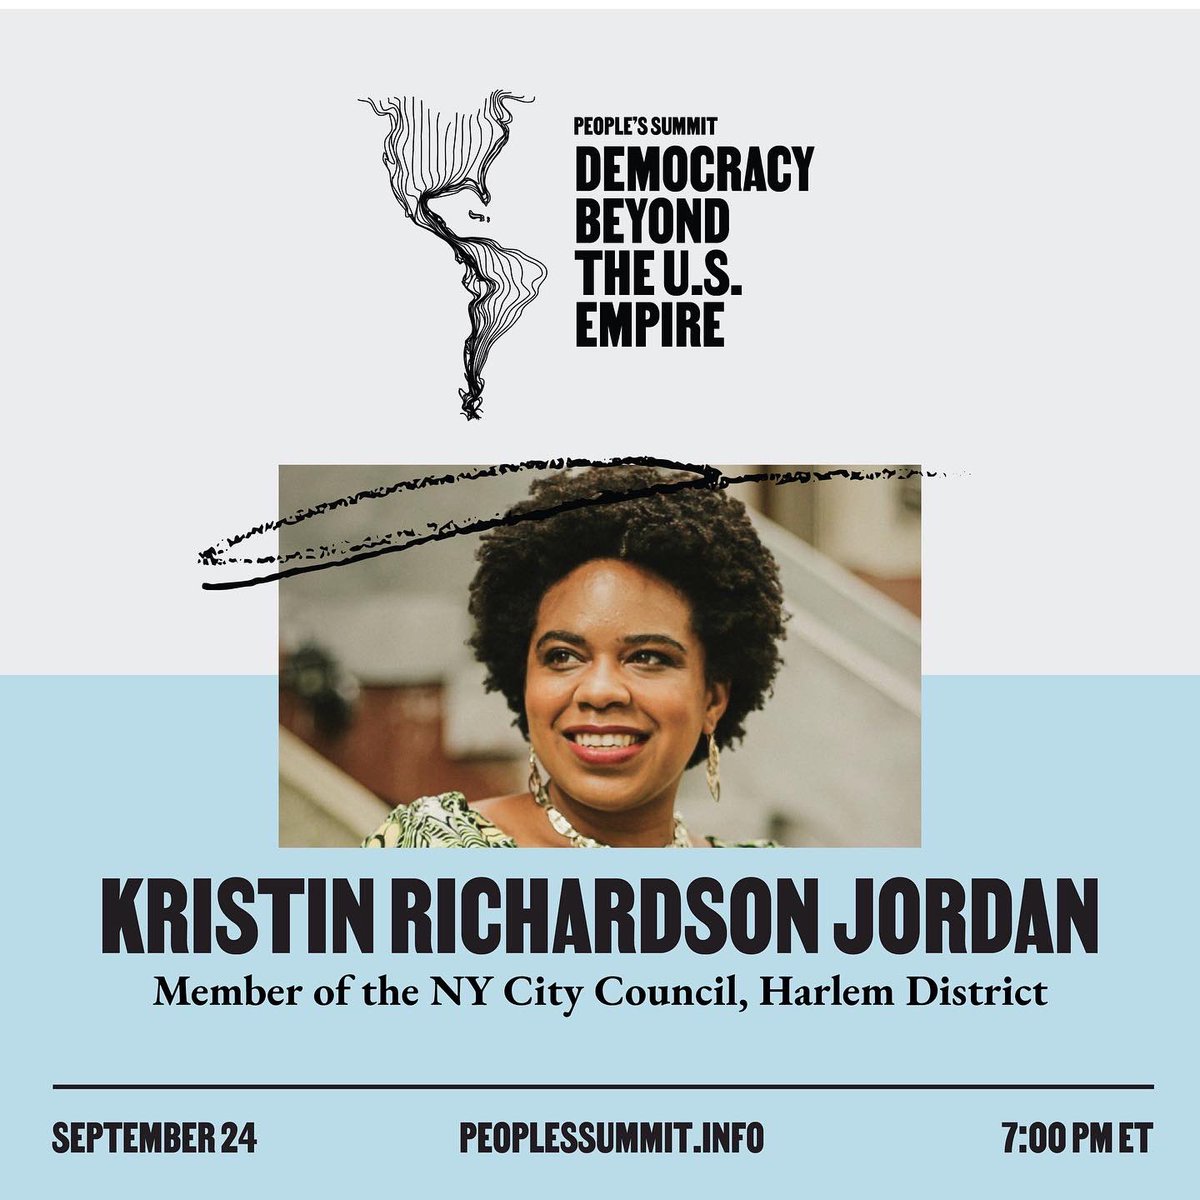 We will also be joined by @Kristin4Harlem, @vijayprashad and @Claud9_